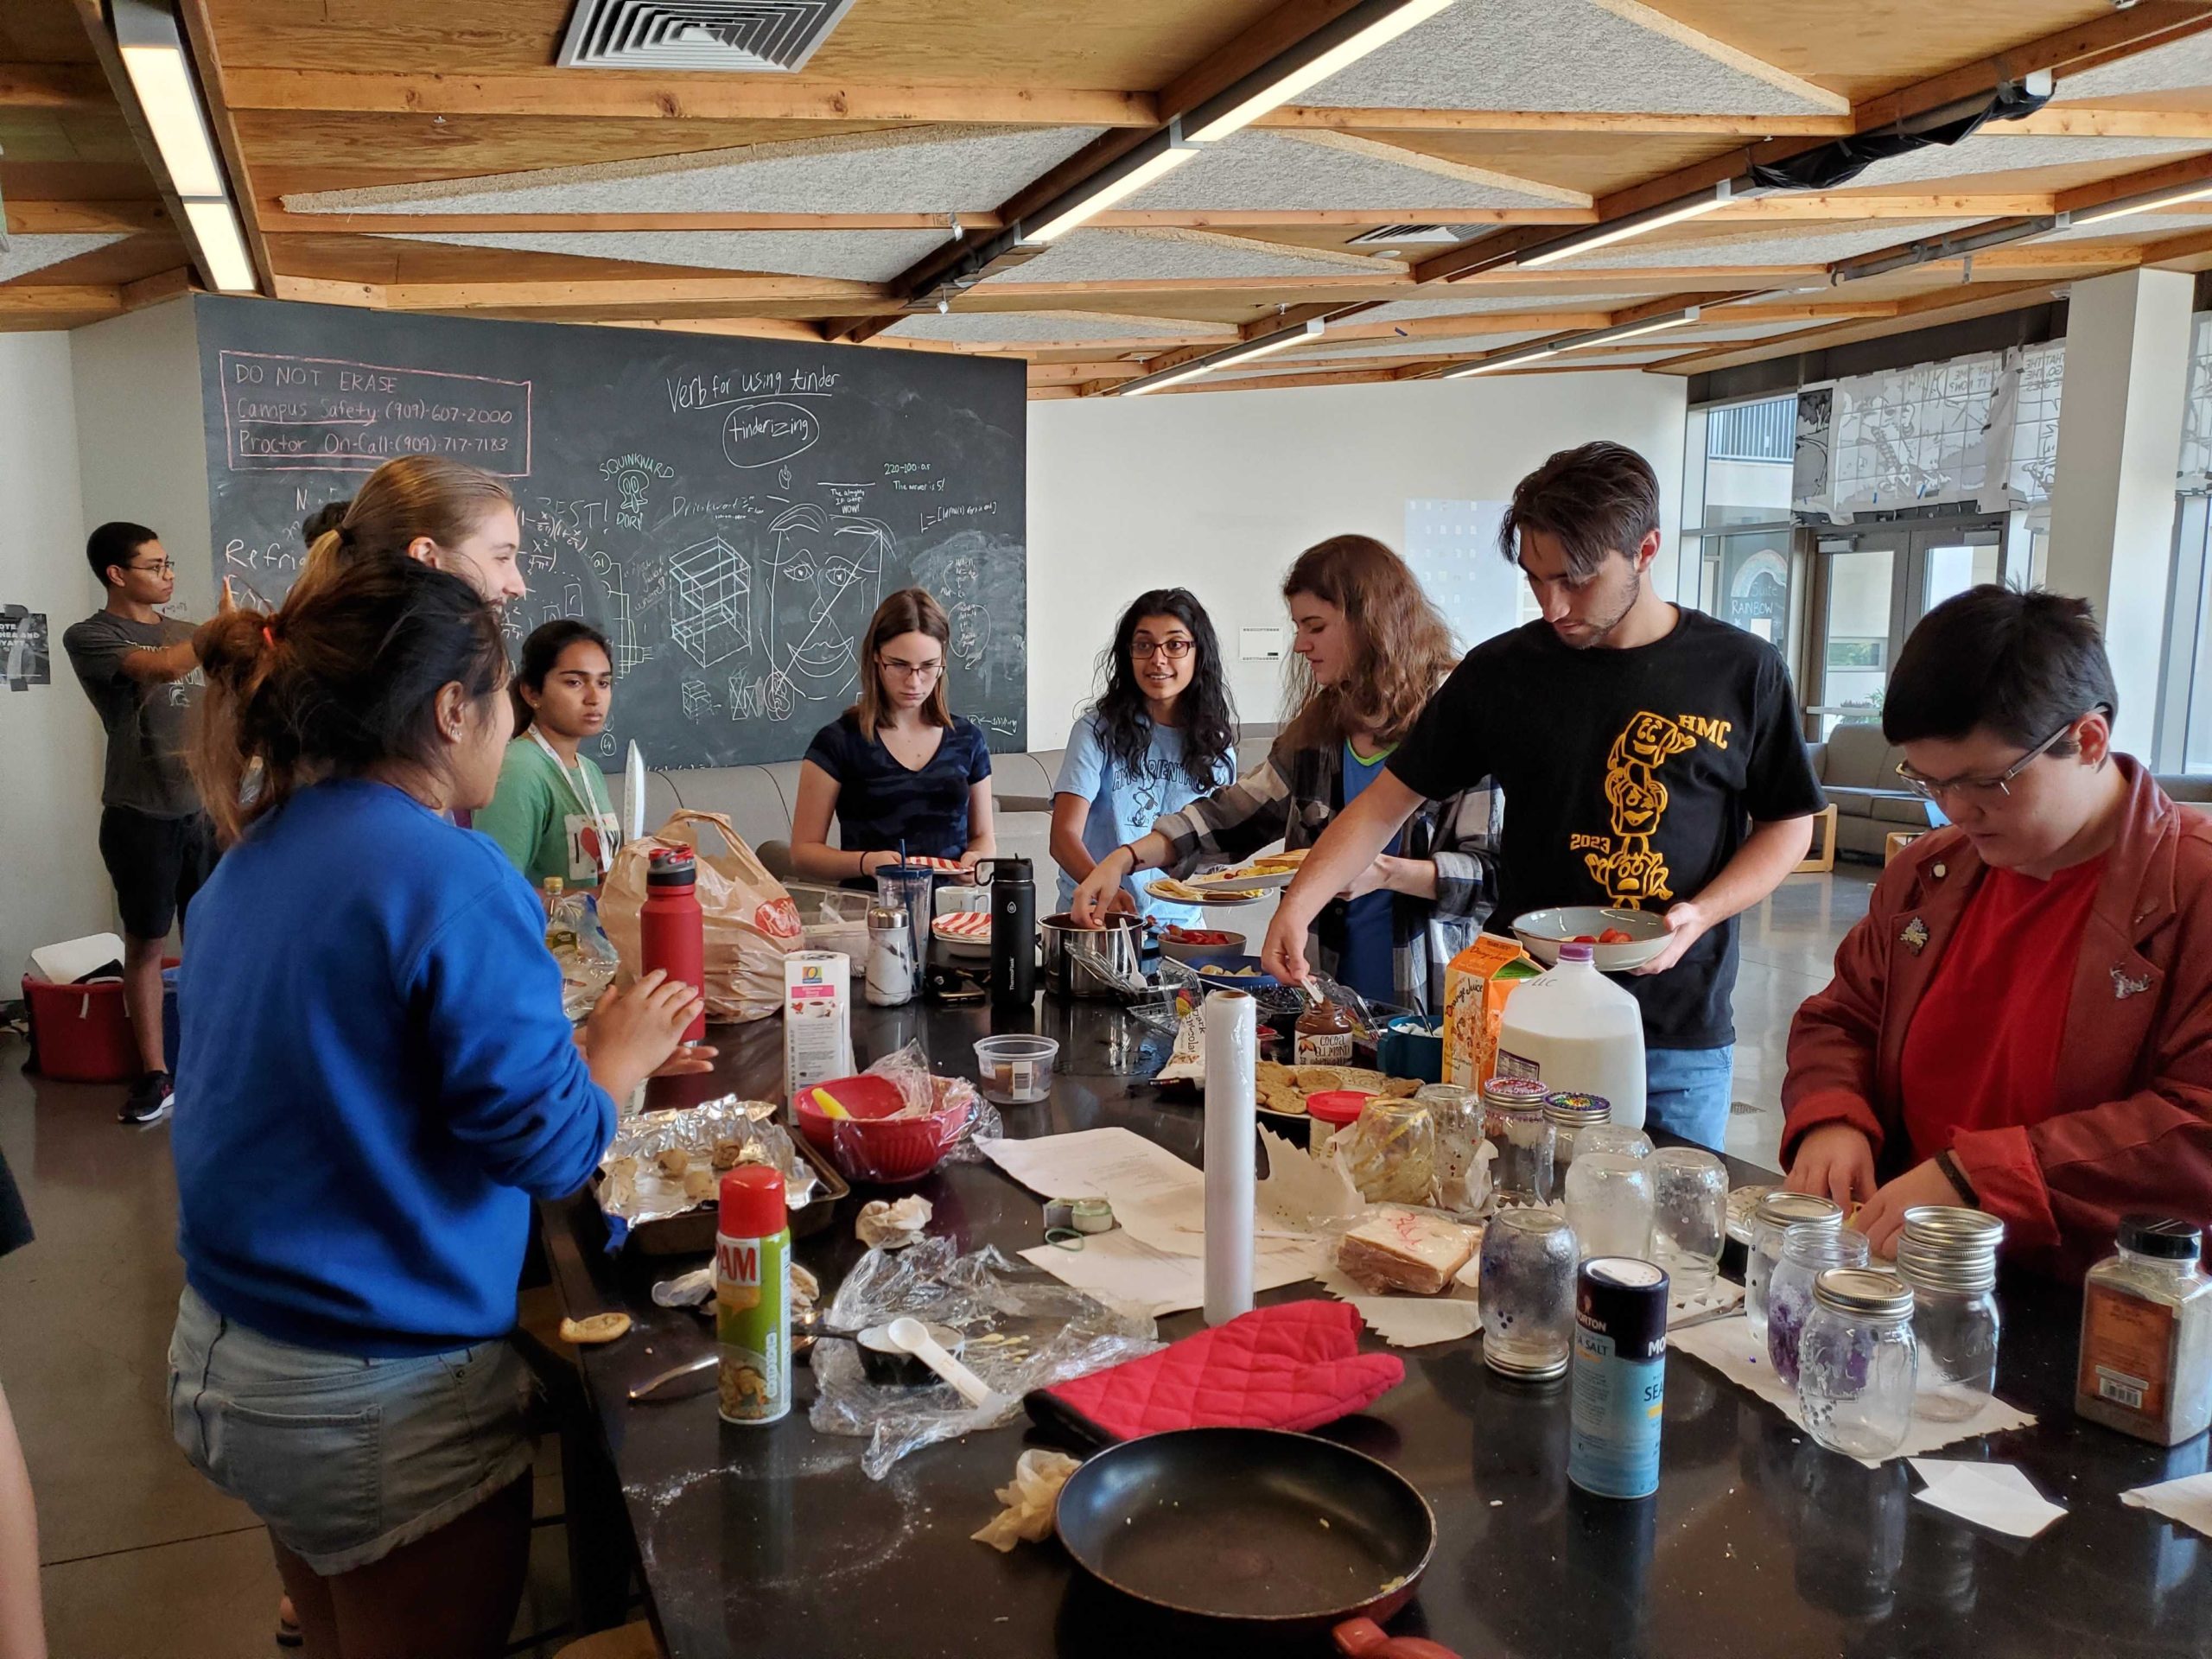 A group of students around a table with different crepe toppings.